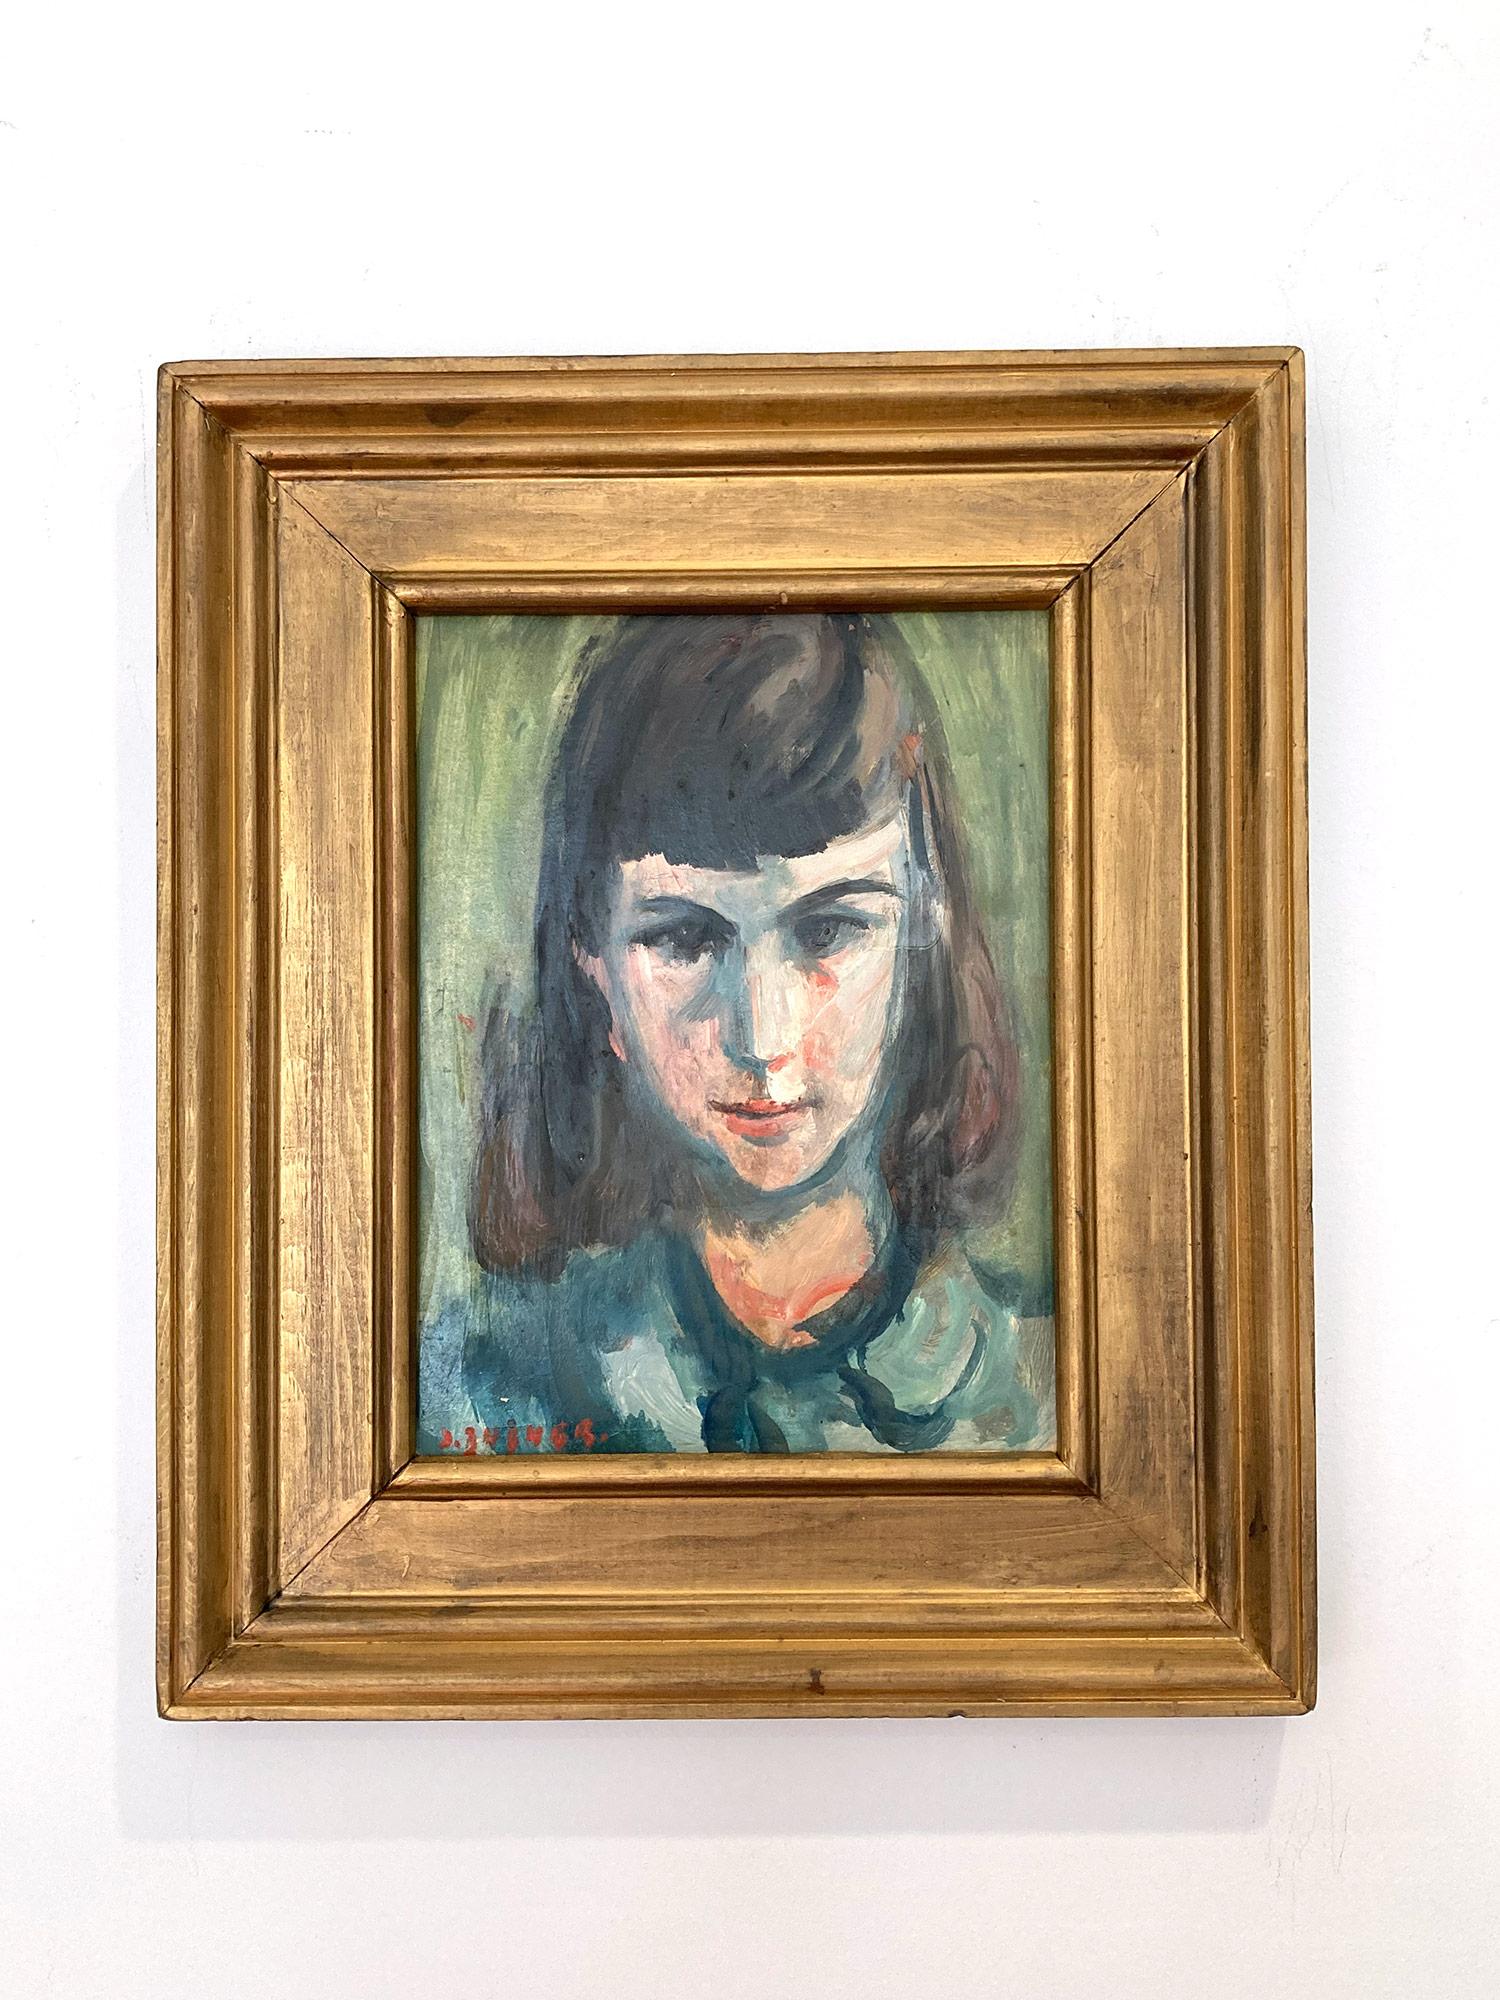 This painting depicts a whimsical portrait of a young girl with short brown hair against a light green background and she wears a blue dress. An emotion is felt with in her face. The bright colors used and quick brush strokes are what makes this